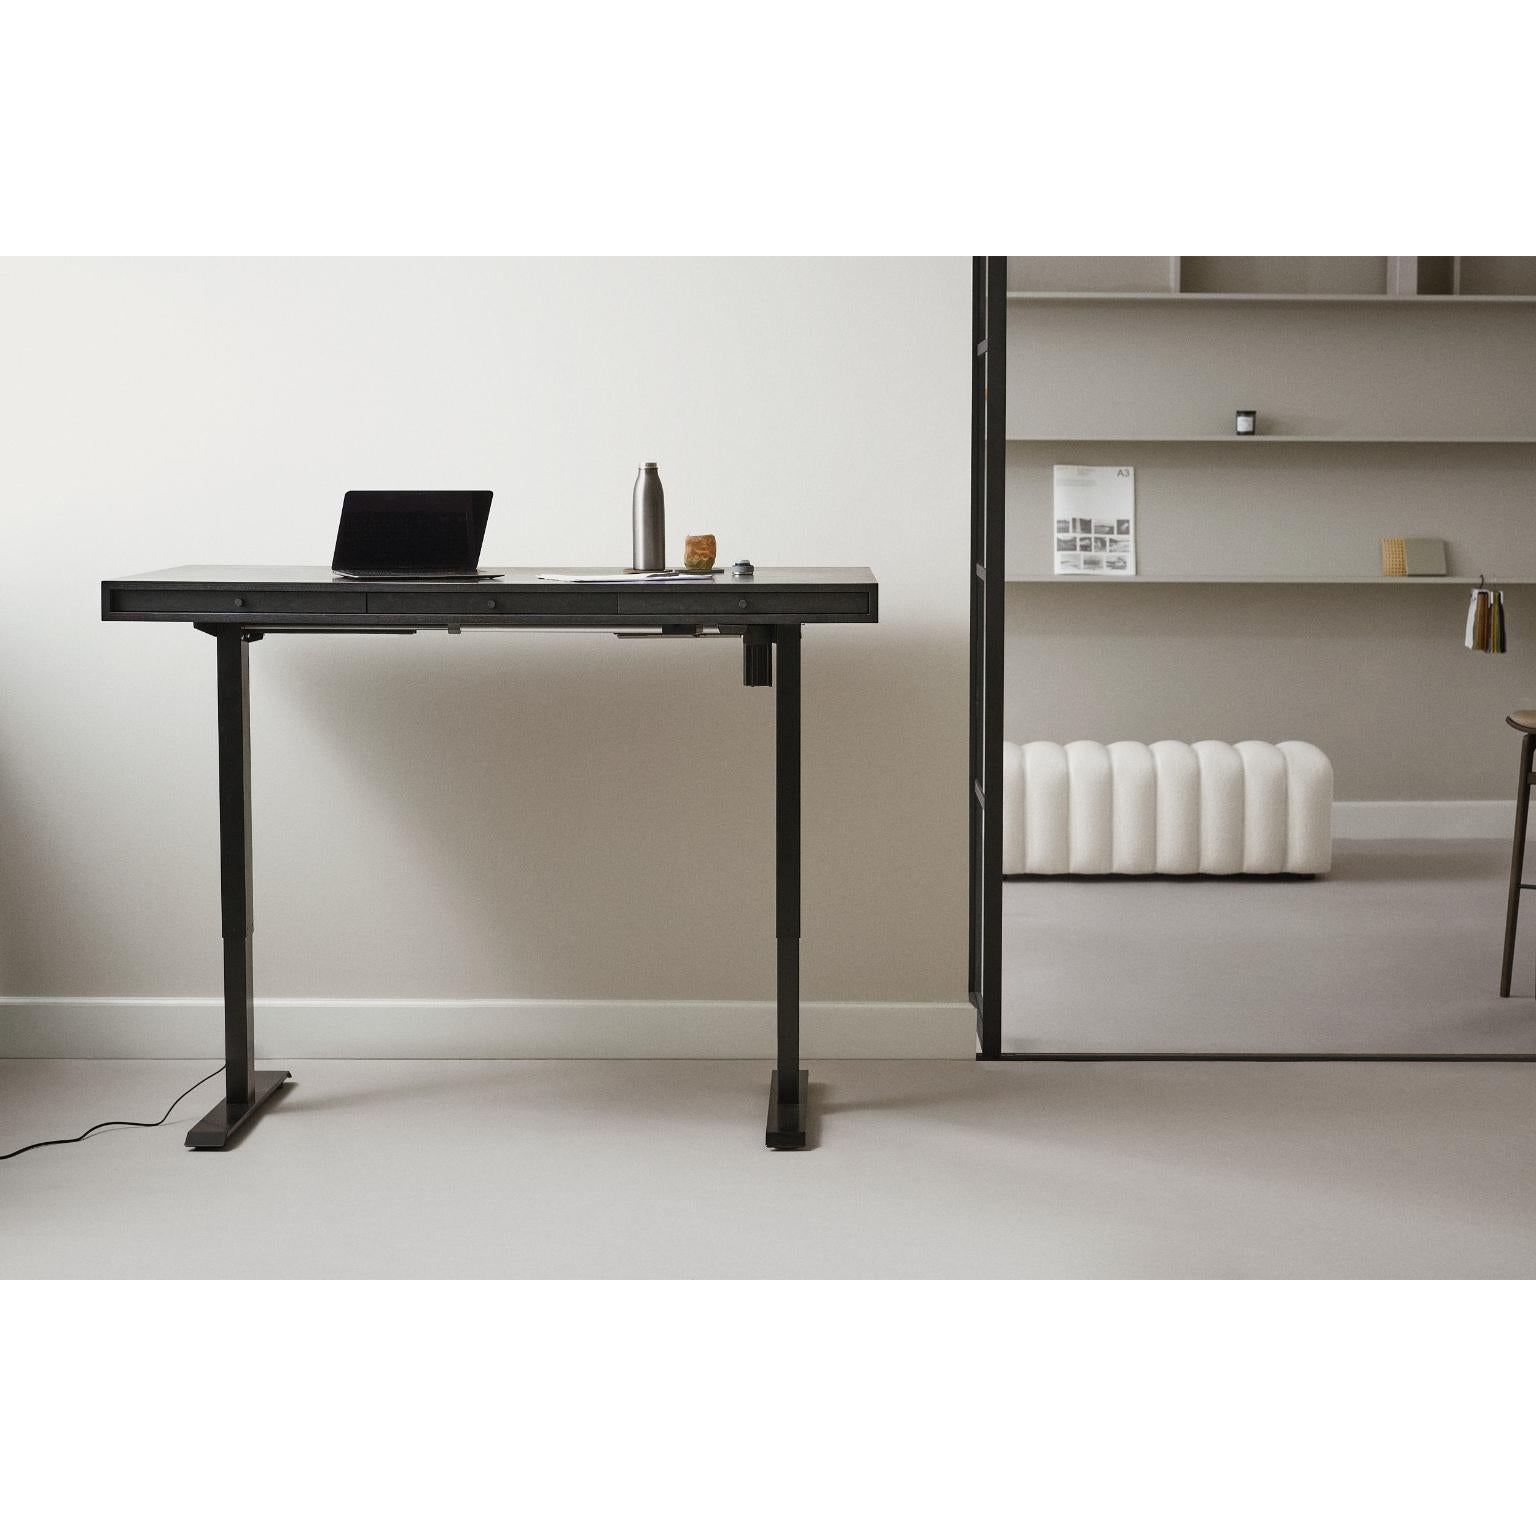 Powder-Coated JFK Home Desk With Adjustable Height Legs by NORR11 For Sale